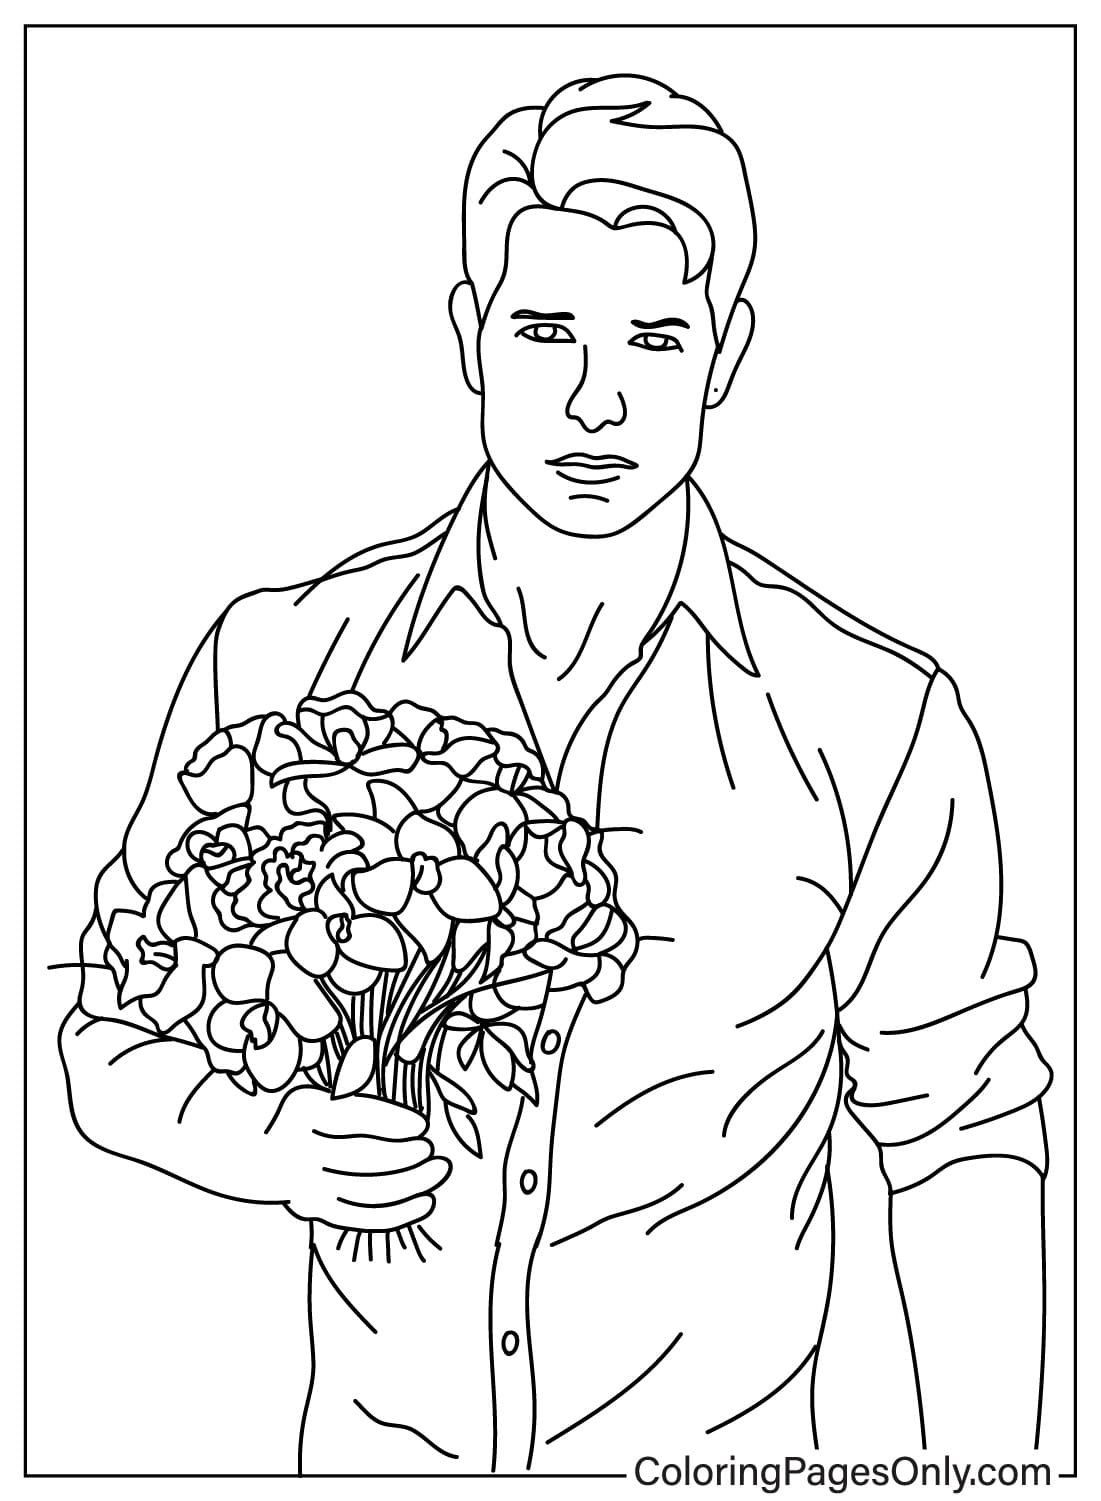 Tom Cruise Coloring Page Free Printable from Tom Cruise